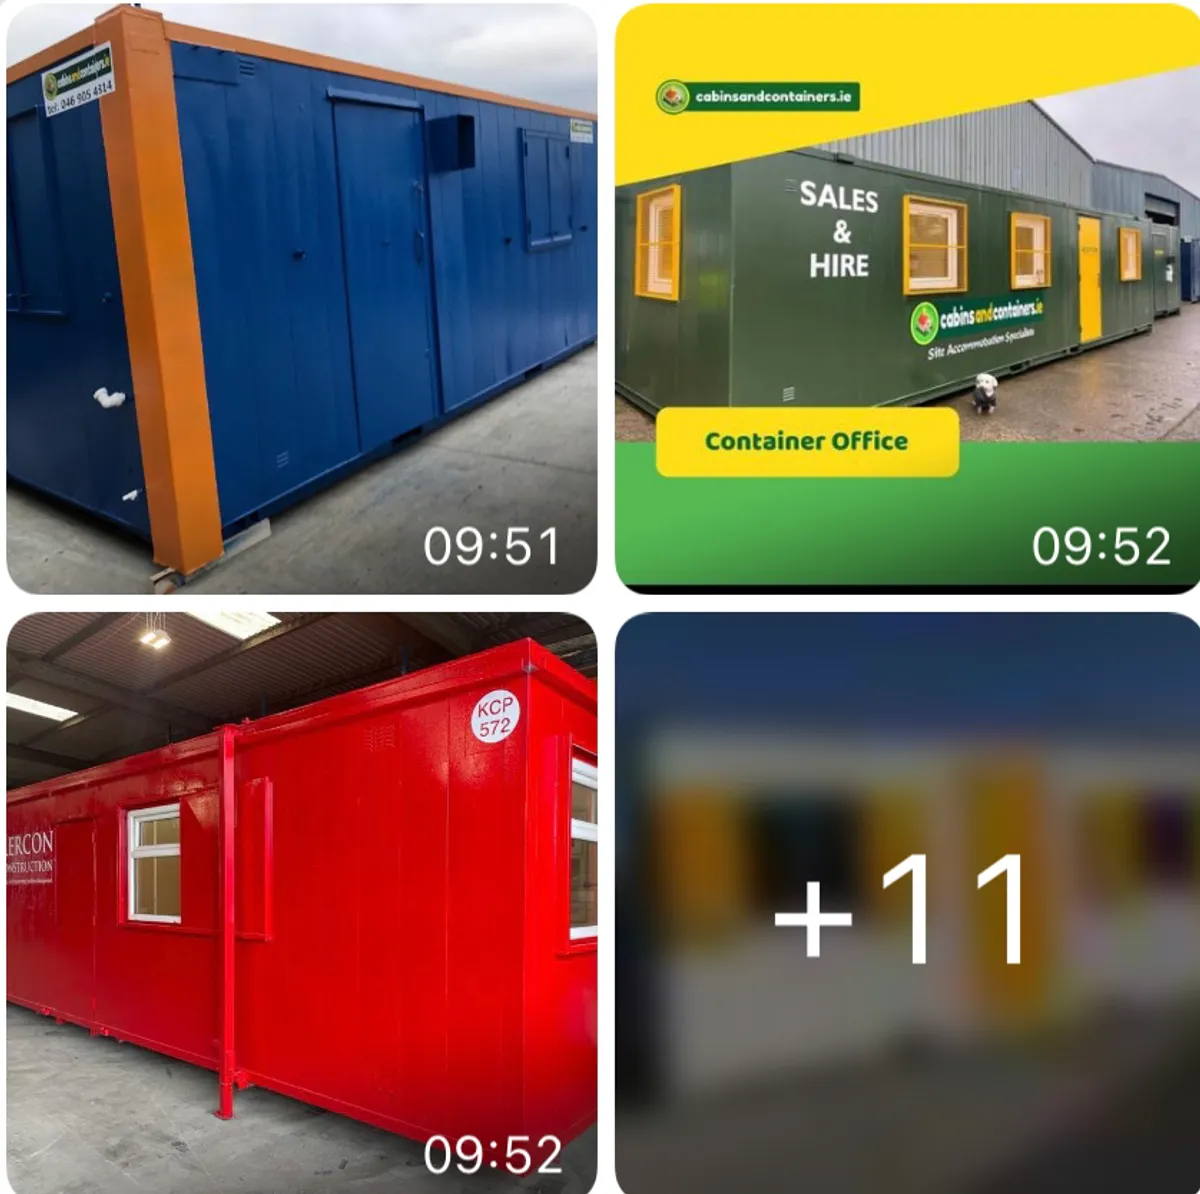 Cabins and containers,what's your colour??